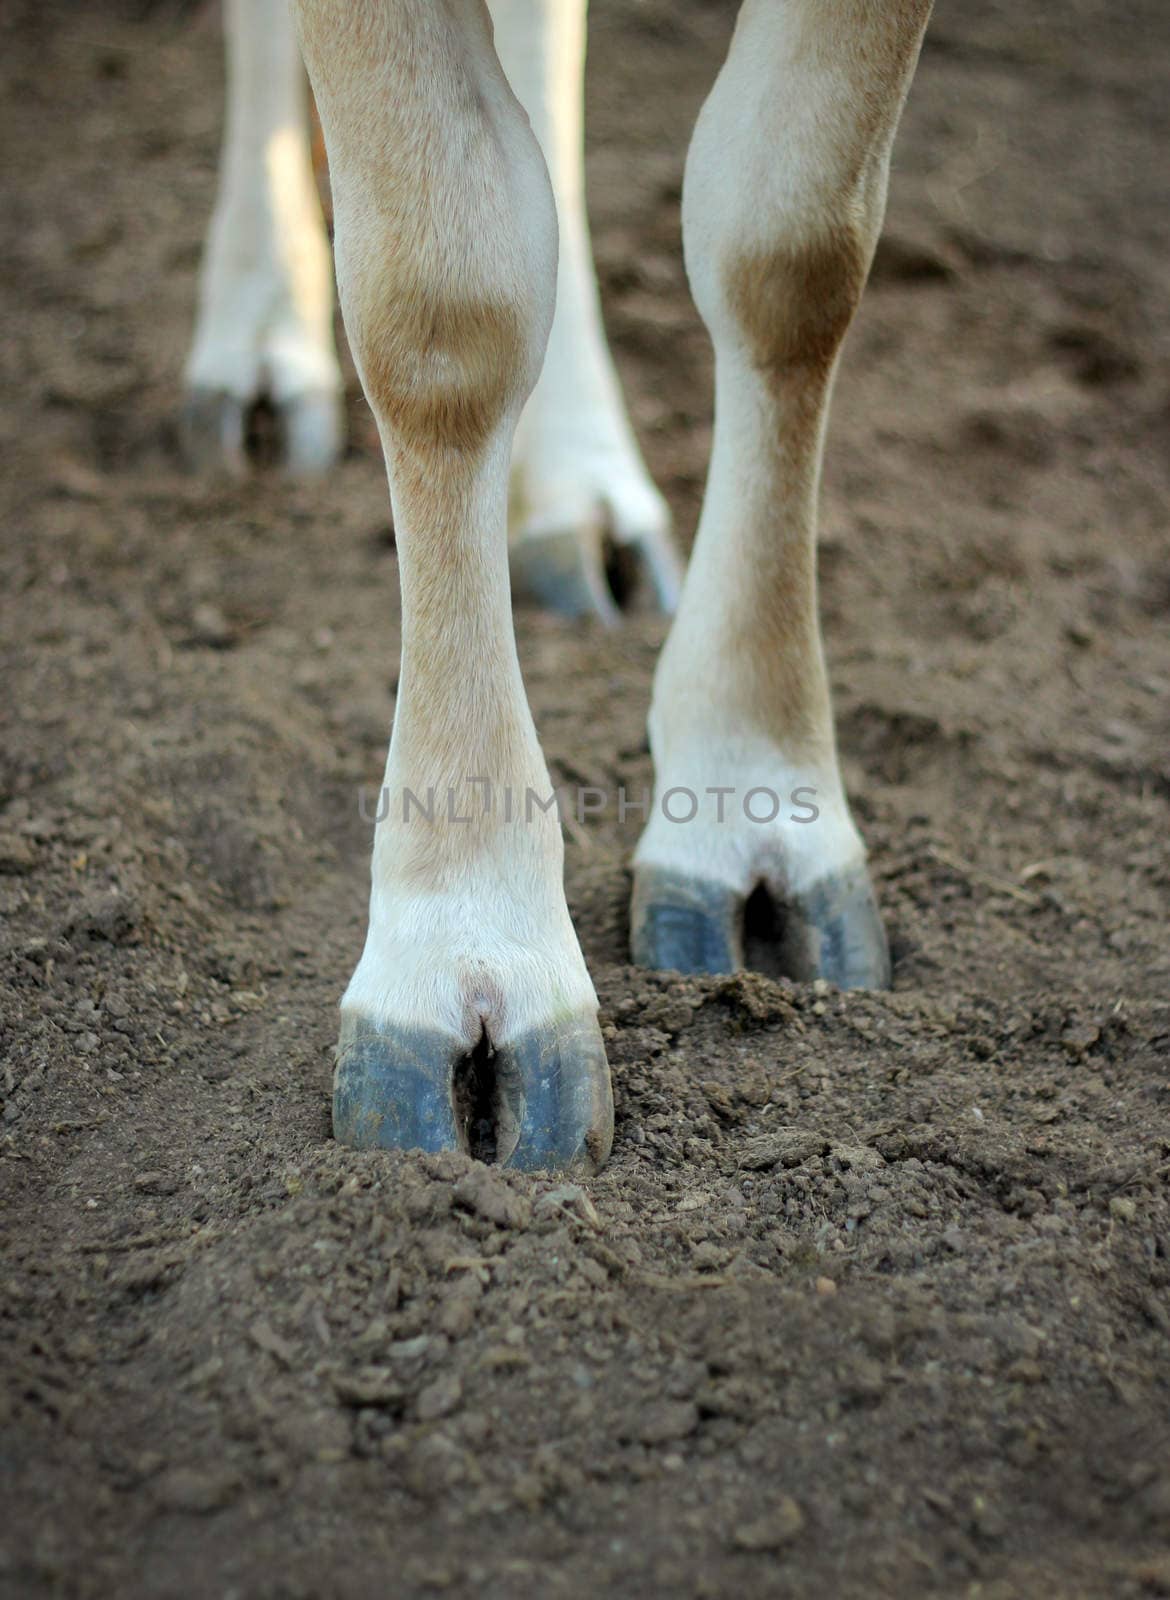 The legs of a cow standing on the ground.